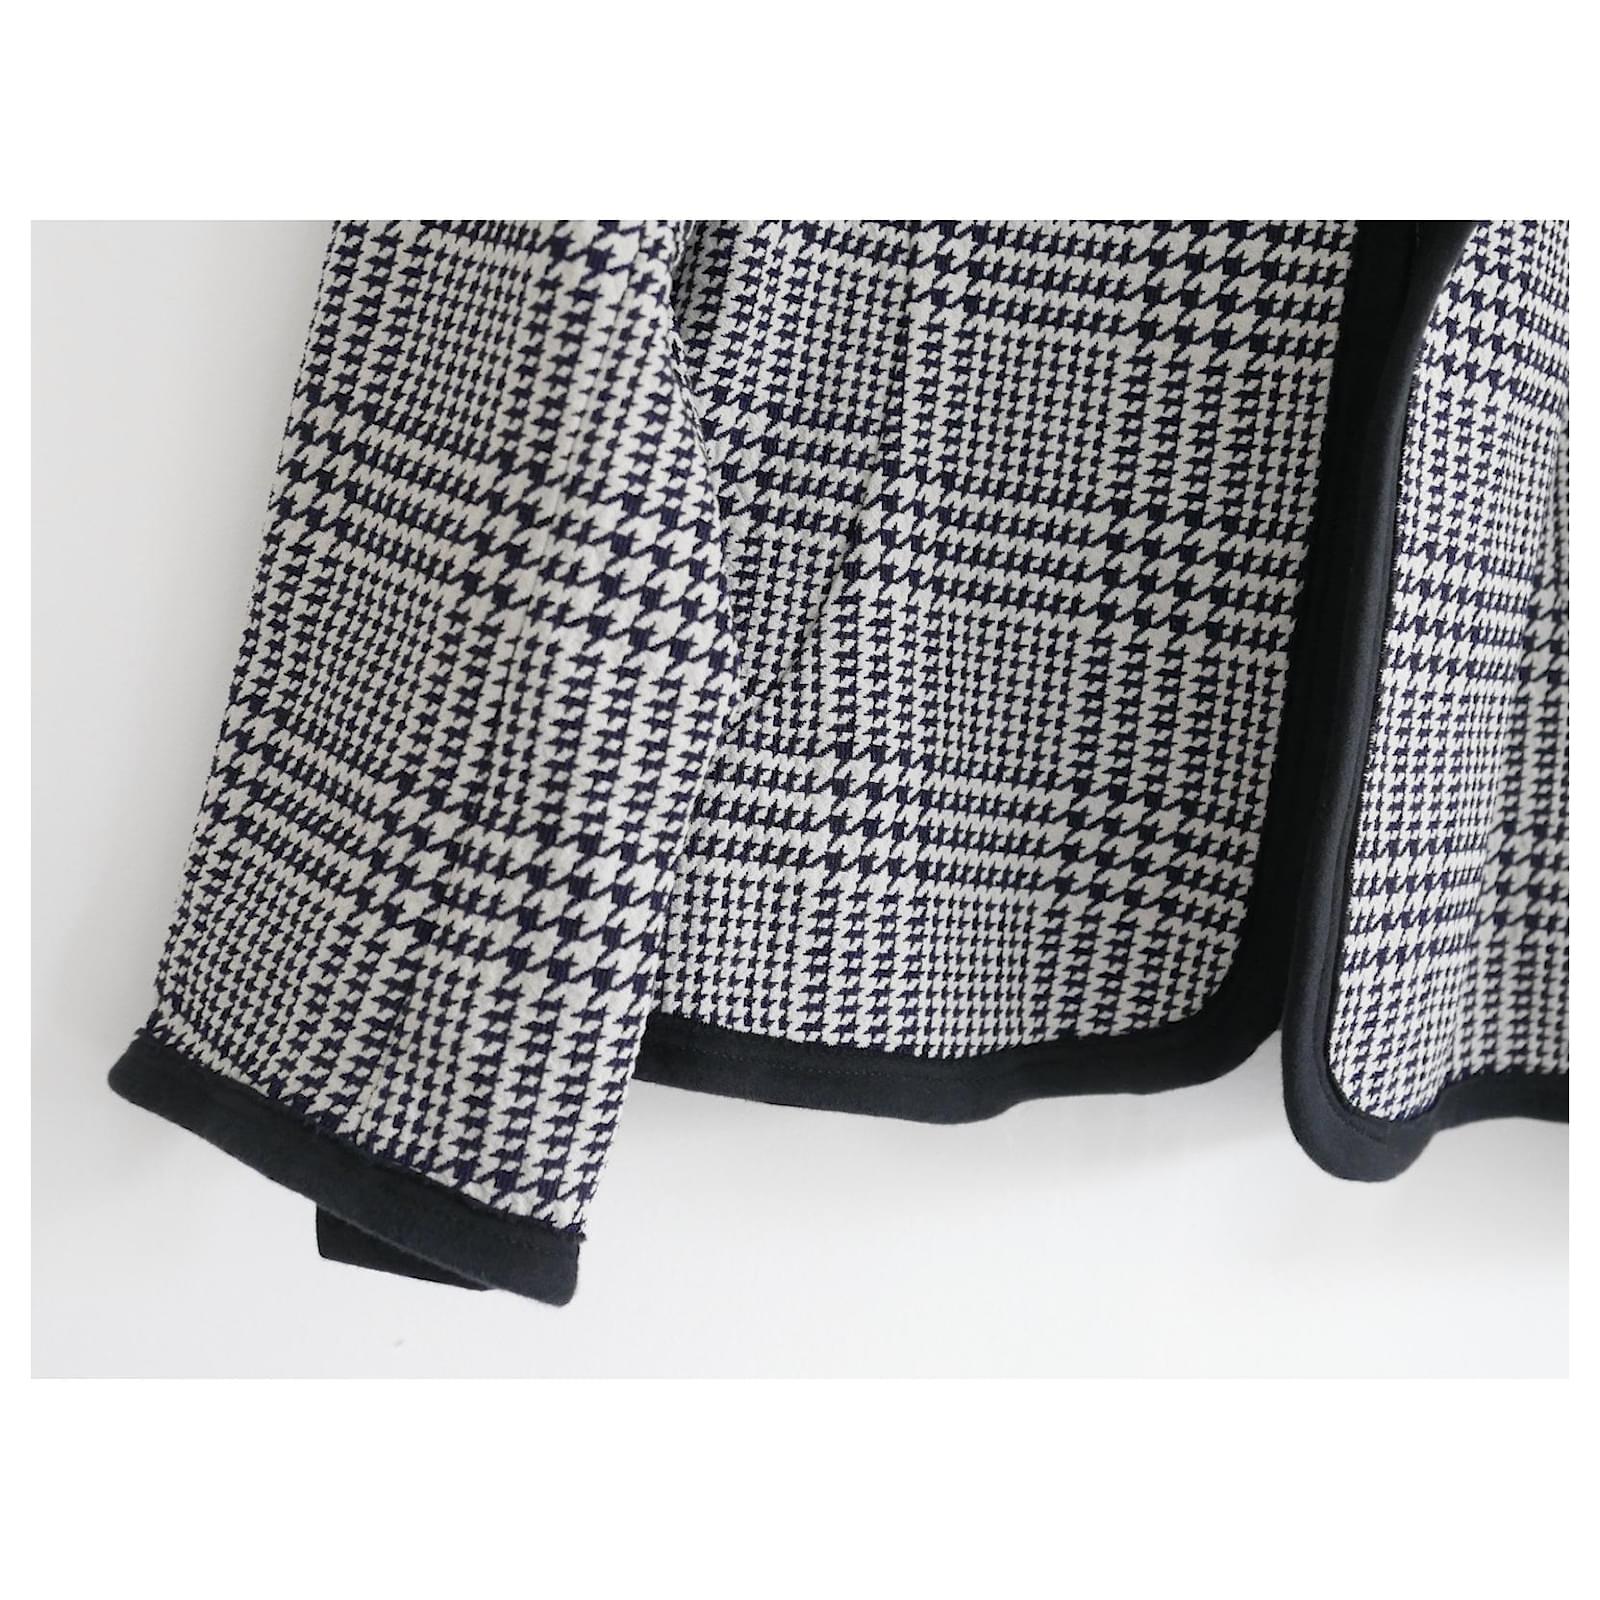 Adorable archival Marni jacket from the Resort 2011 collection. worn once. Made from black and white houndstooth check cotton blend with graphic black edgings. It has a school blazer inspired cut with rounded lapels, Open front, curved seaming and